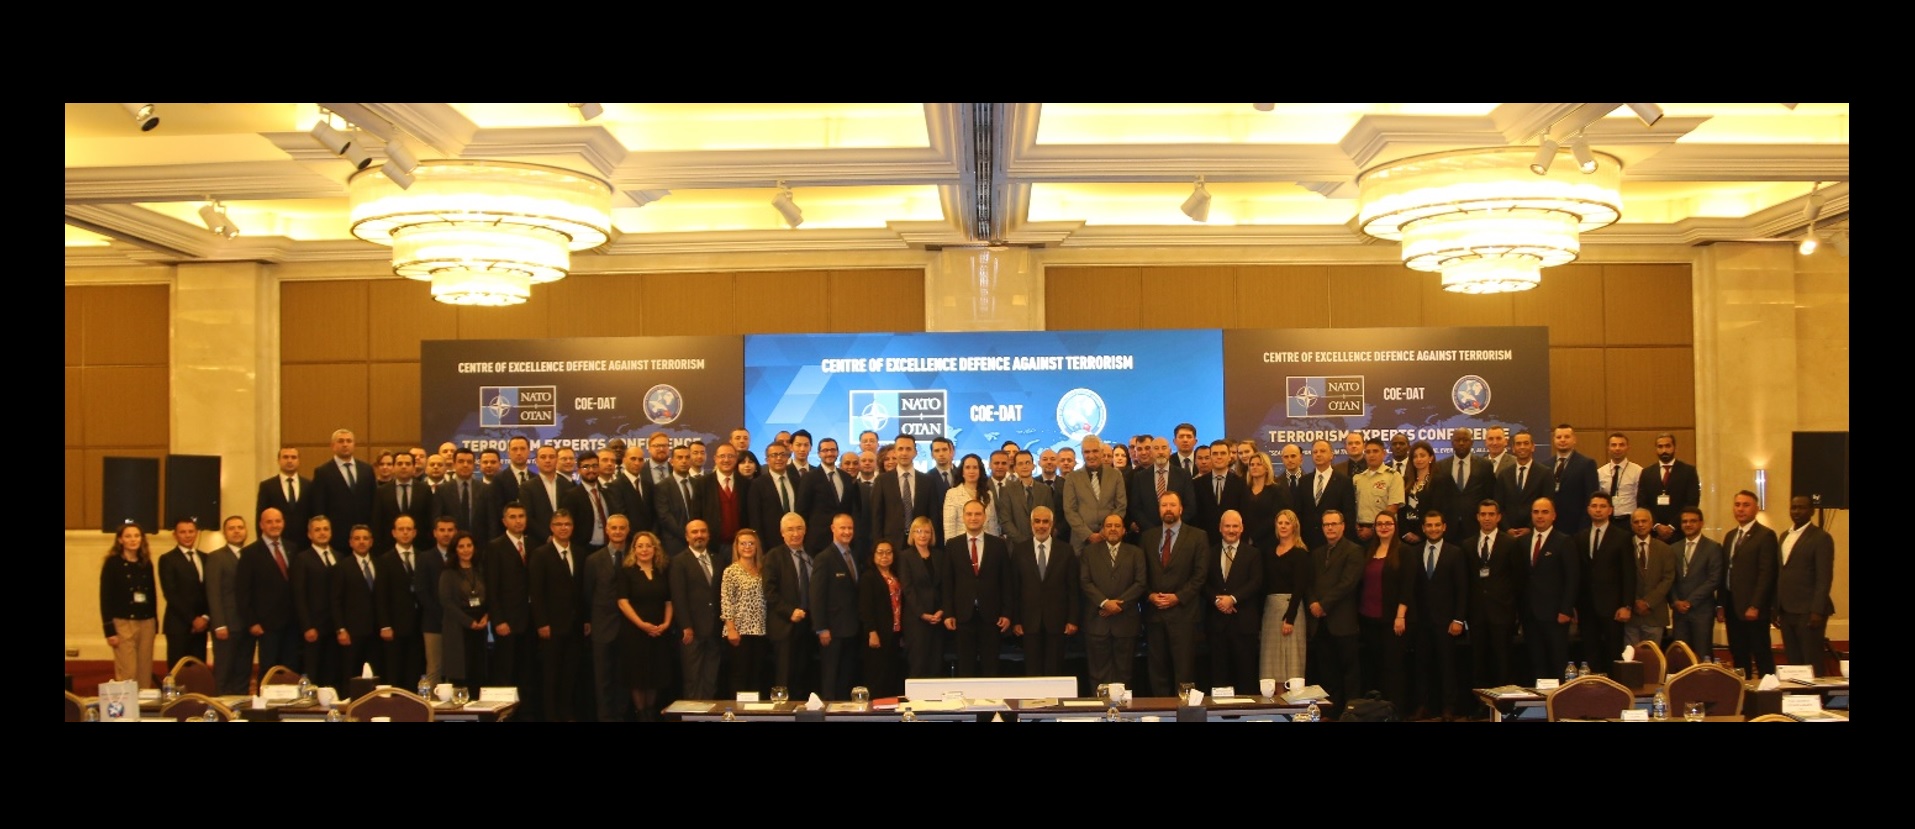 Terrorism Experts Conference was held on 18-19 October 2023 with the participation of 14 speakers from 7 countries and 103 participants from 24 countries.
